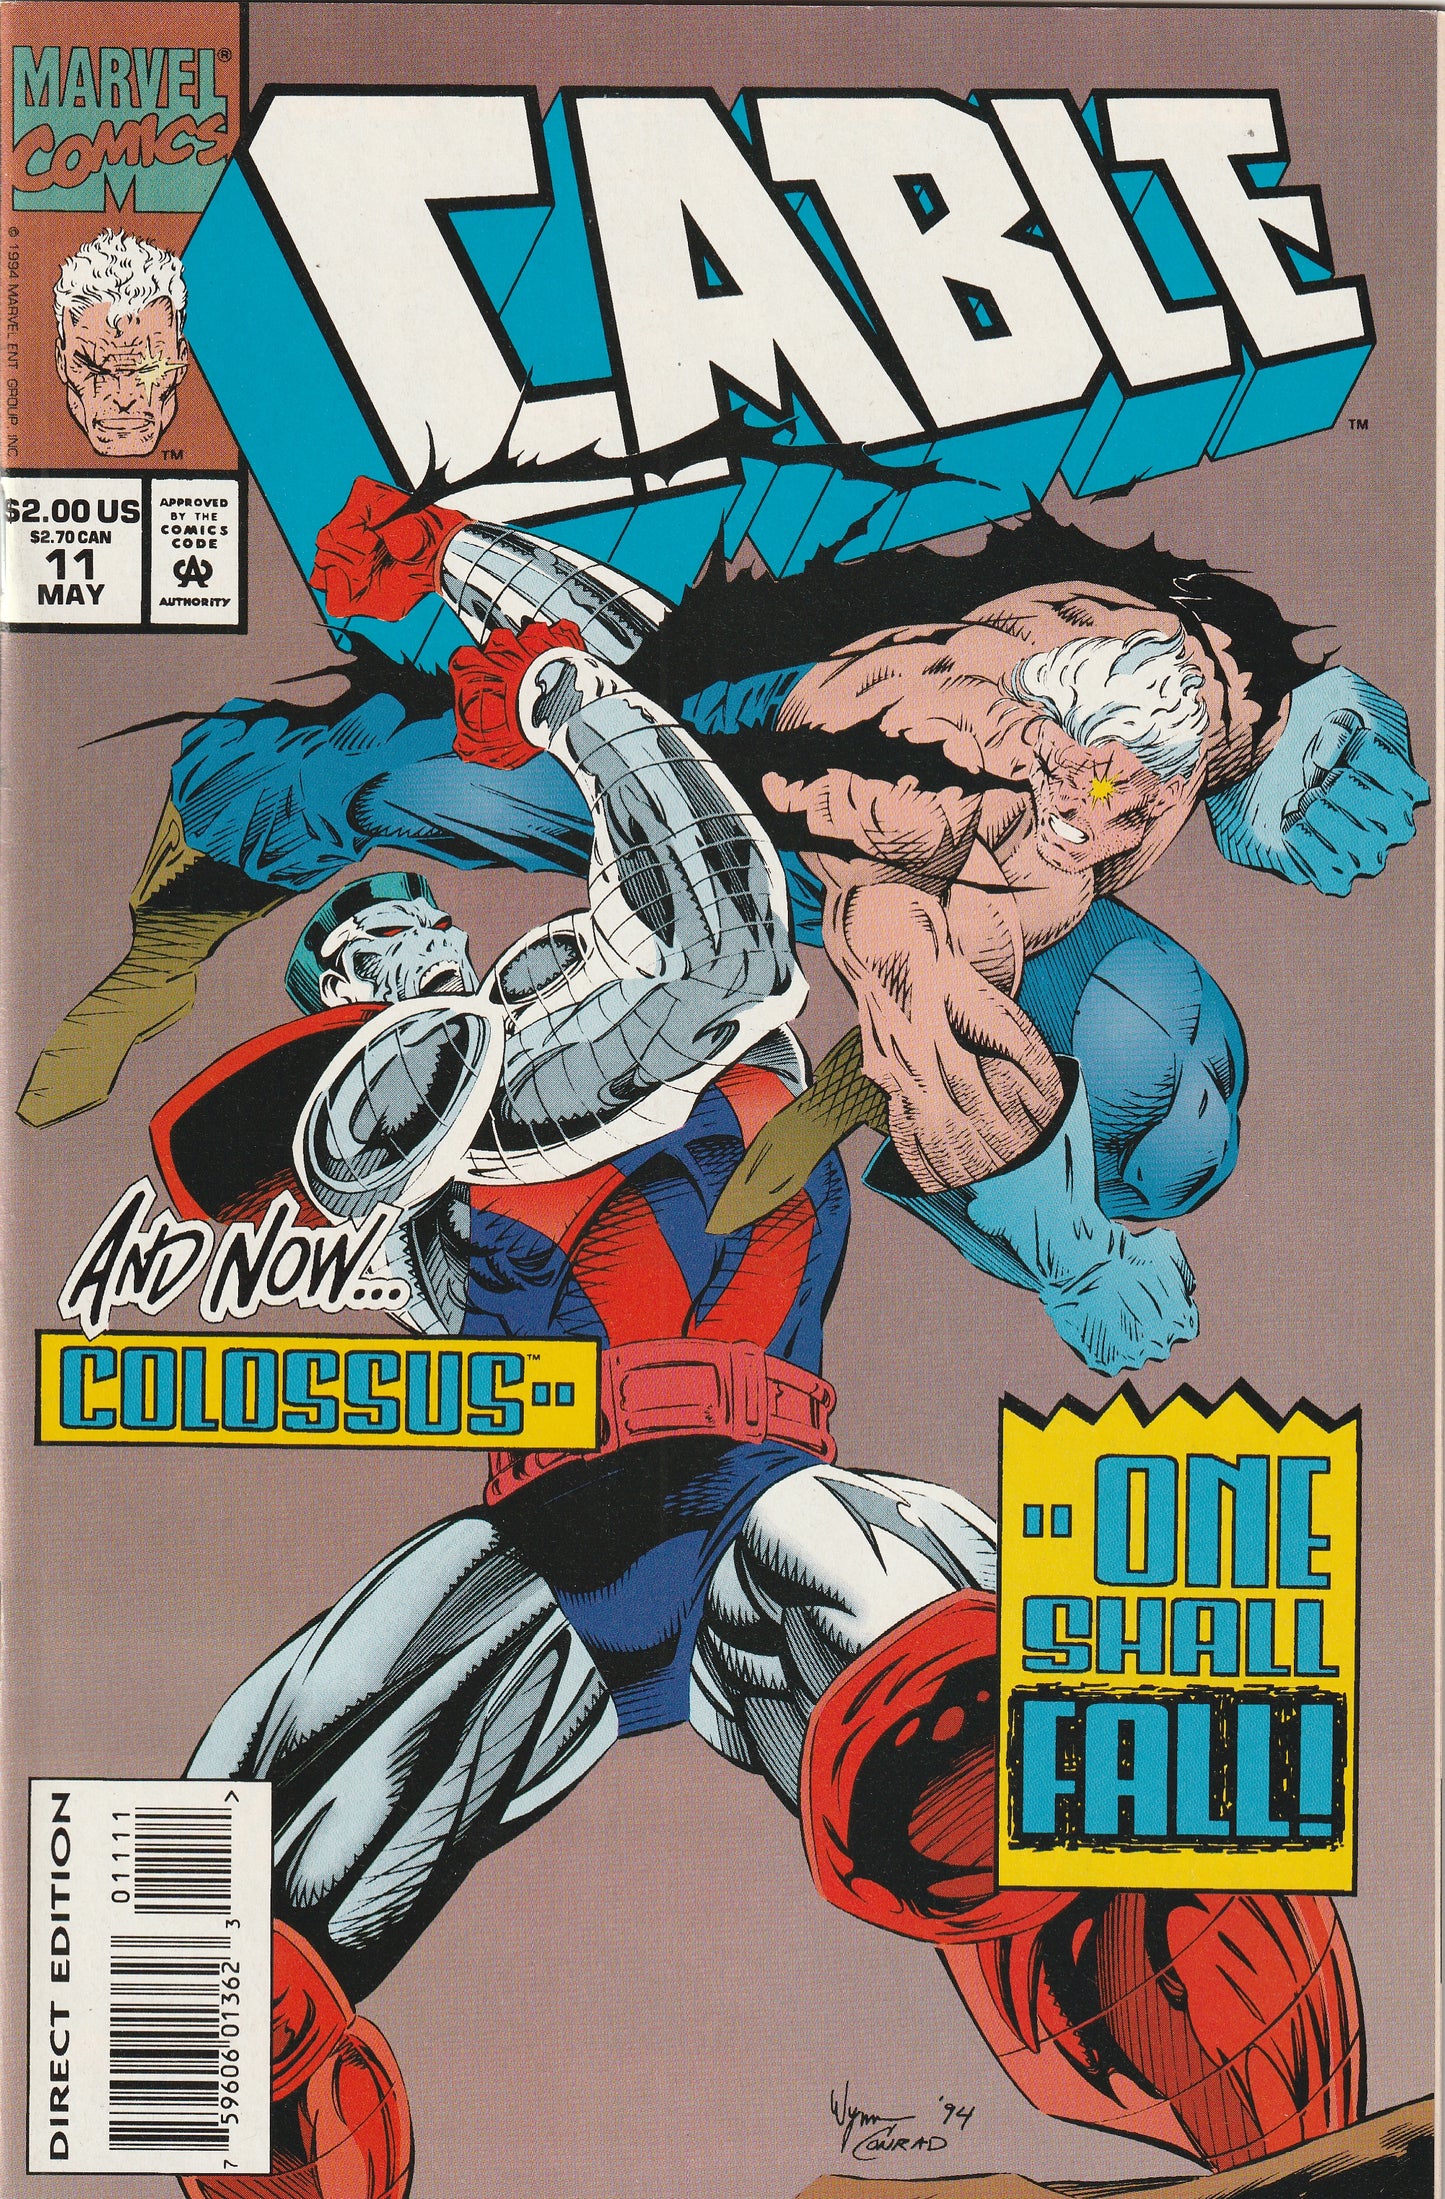 Cable #11 (1994)